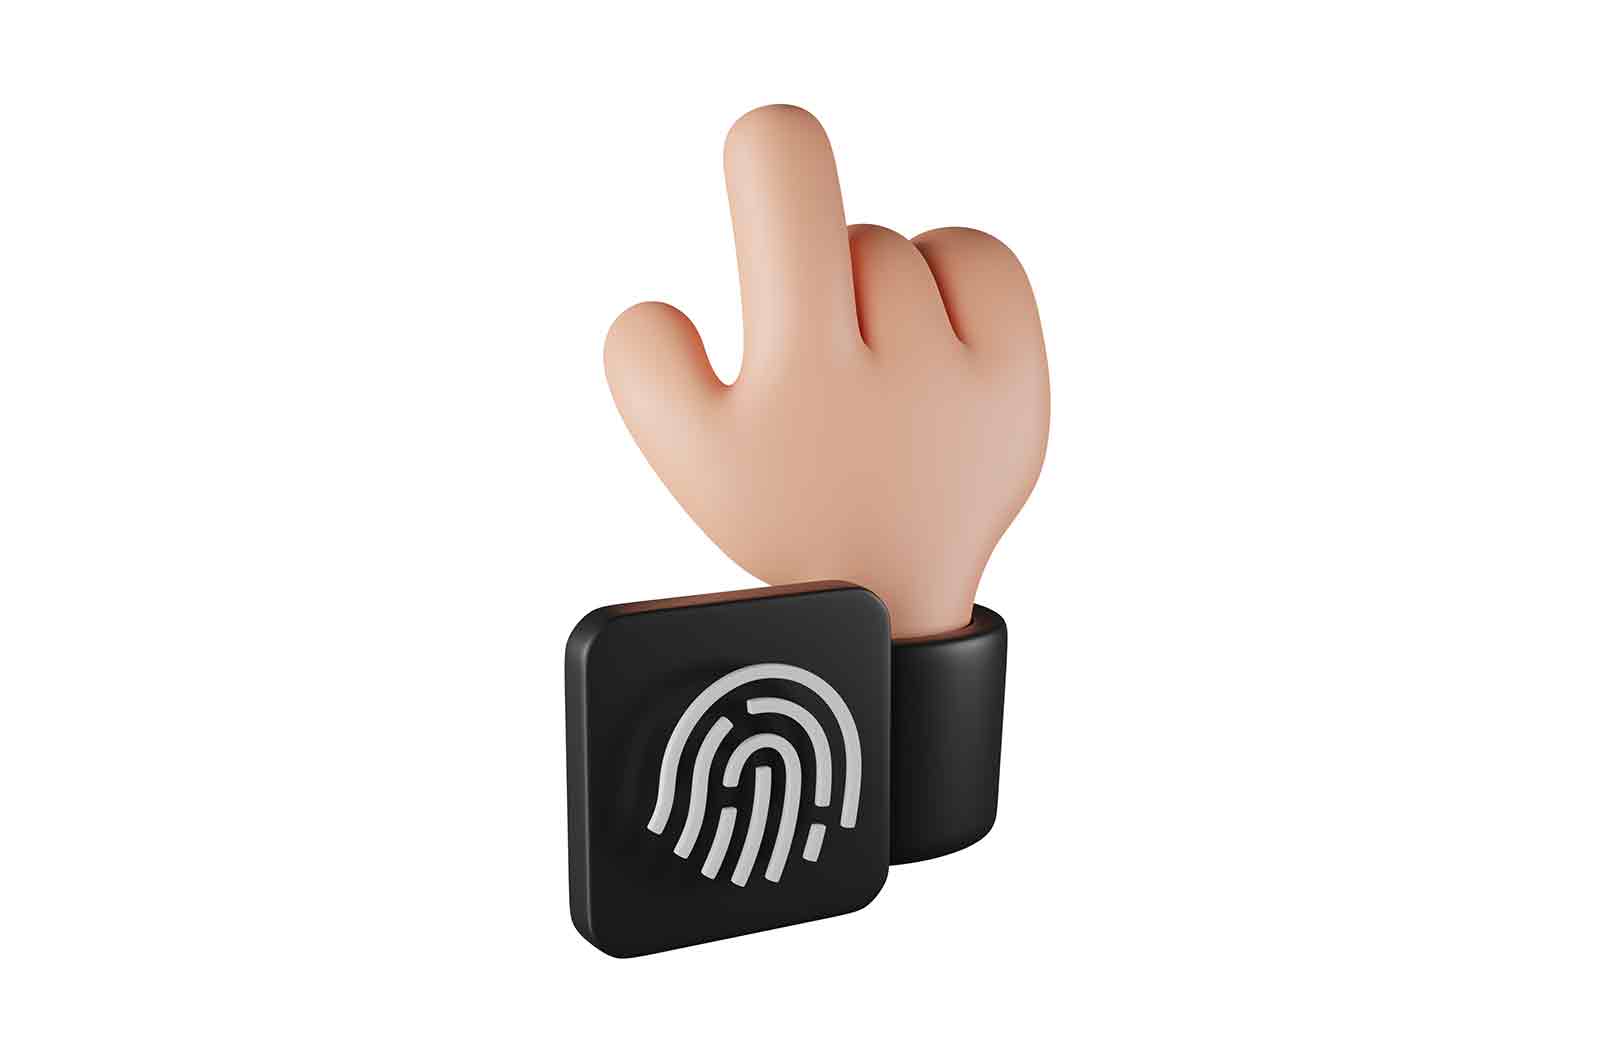 Biometric fingerprint identification icon, 3d rendered illustration. Cyber security, data protection and privacy 3d isometric concept